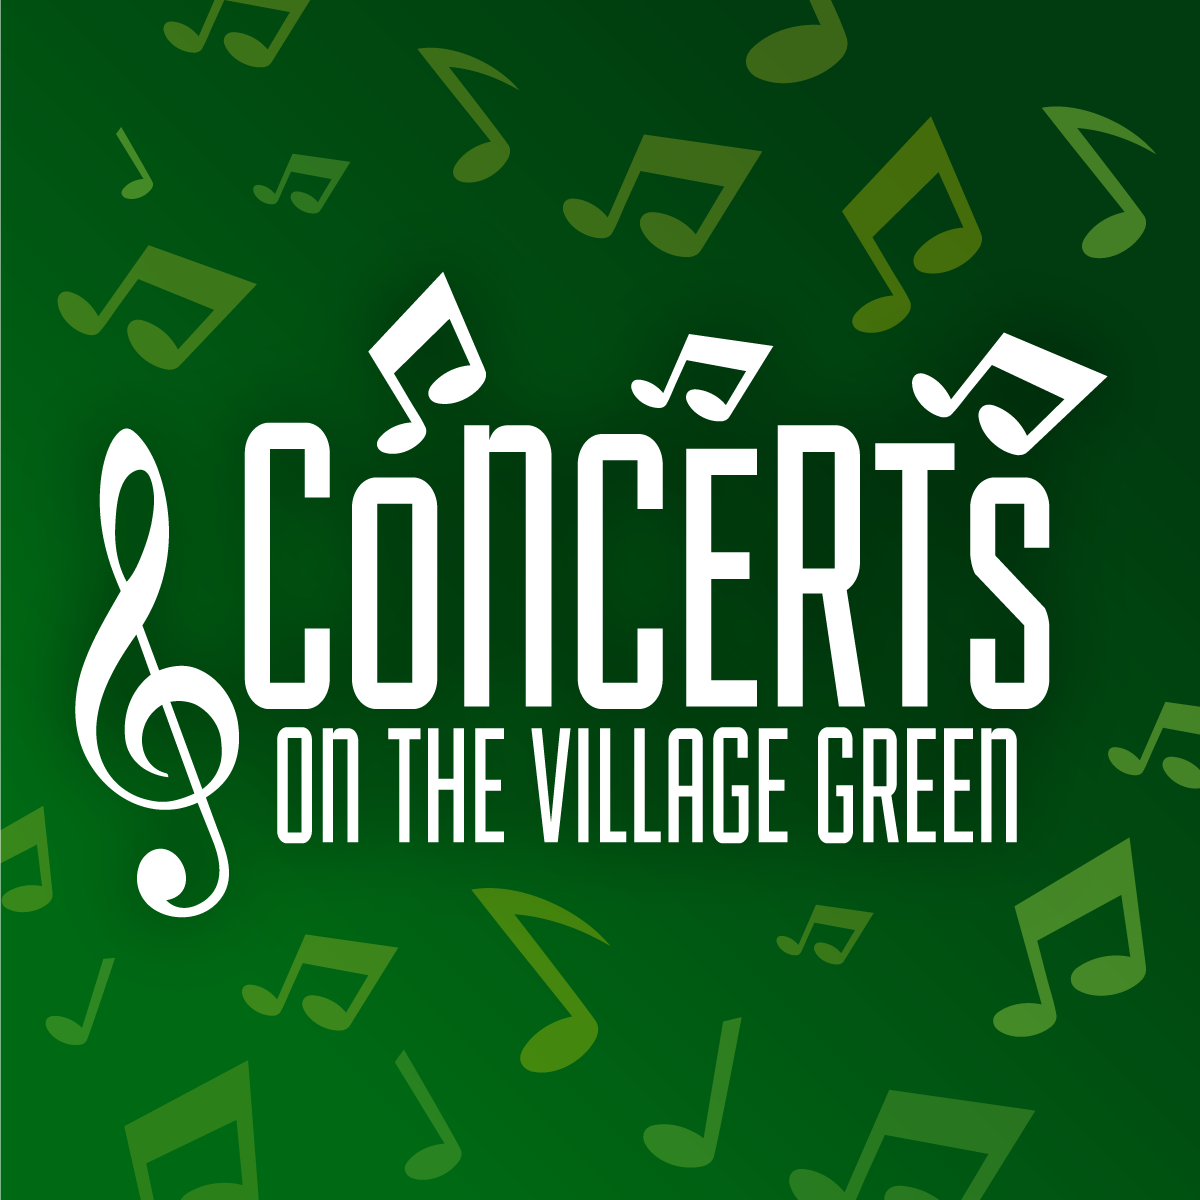 Join Us for Concerts on the Village Green